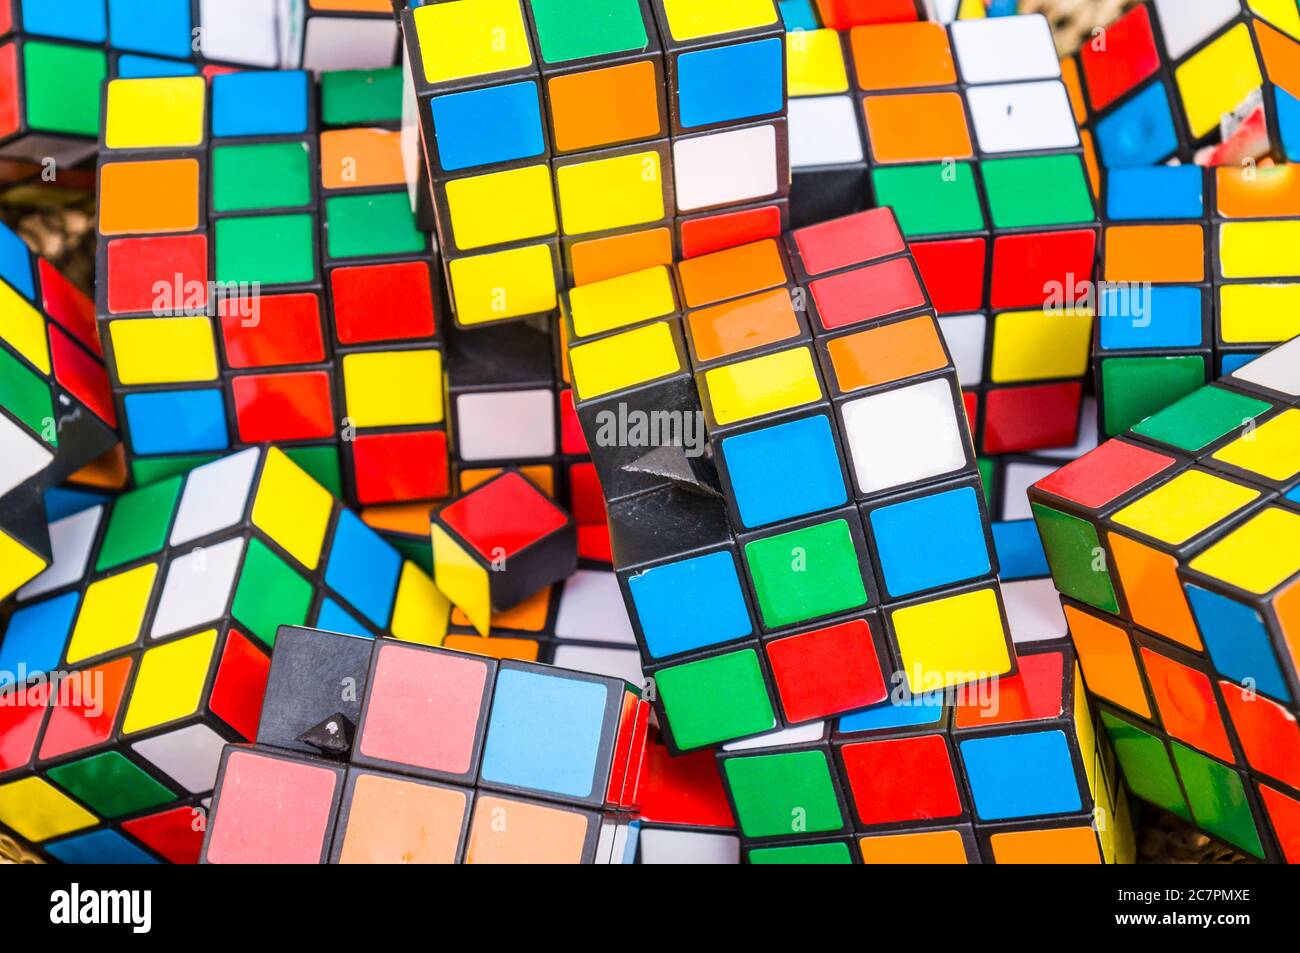 Bunch of Rubik's cube showing their random colors on each side Stock Photo  - Alamy